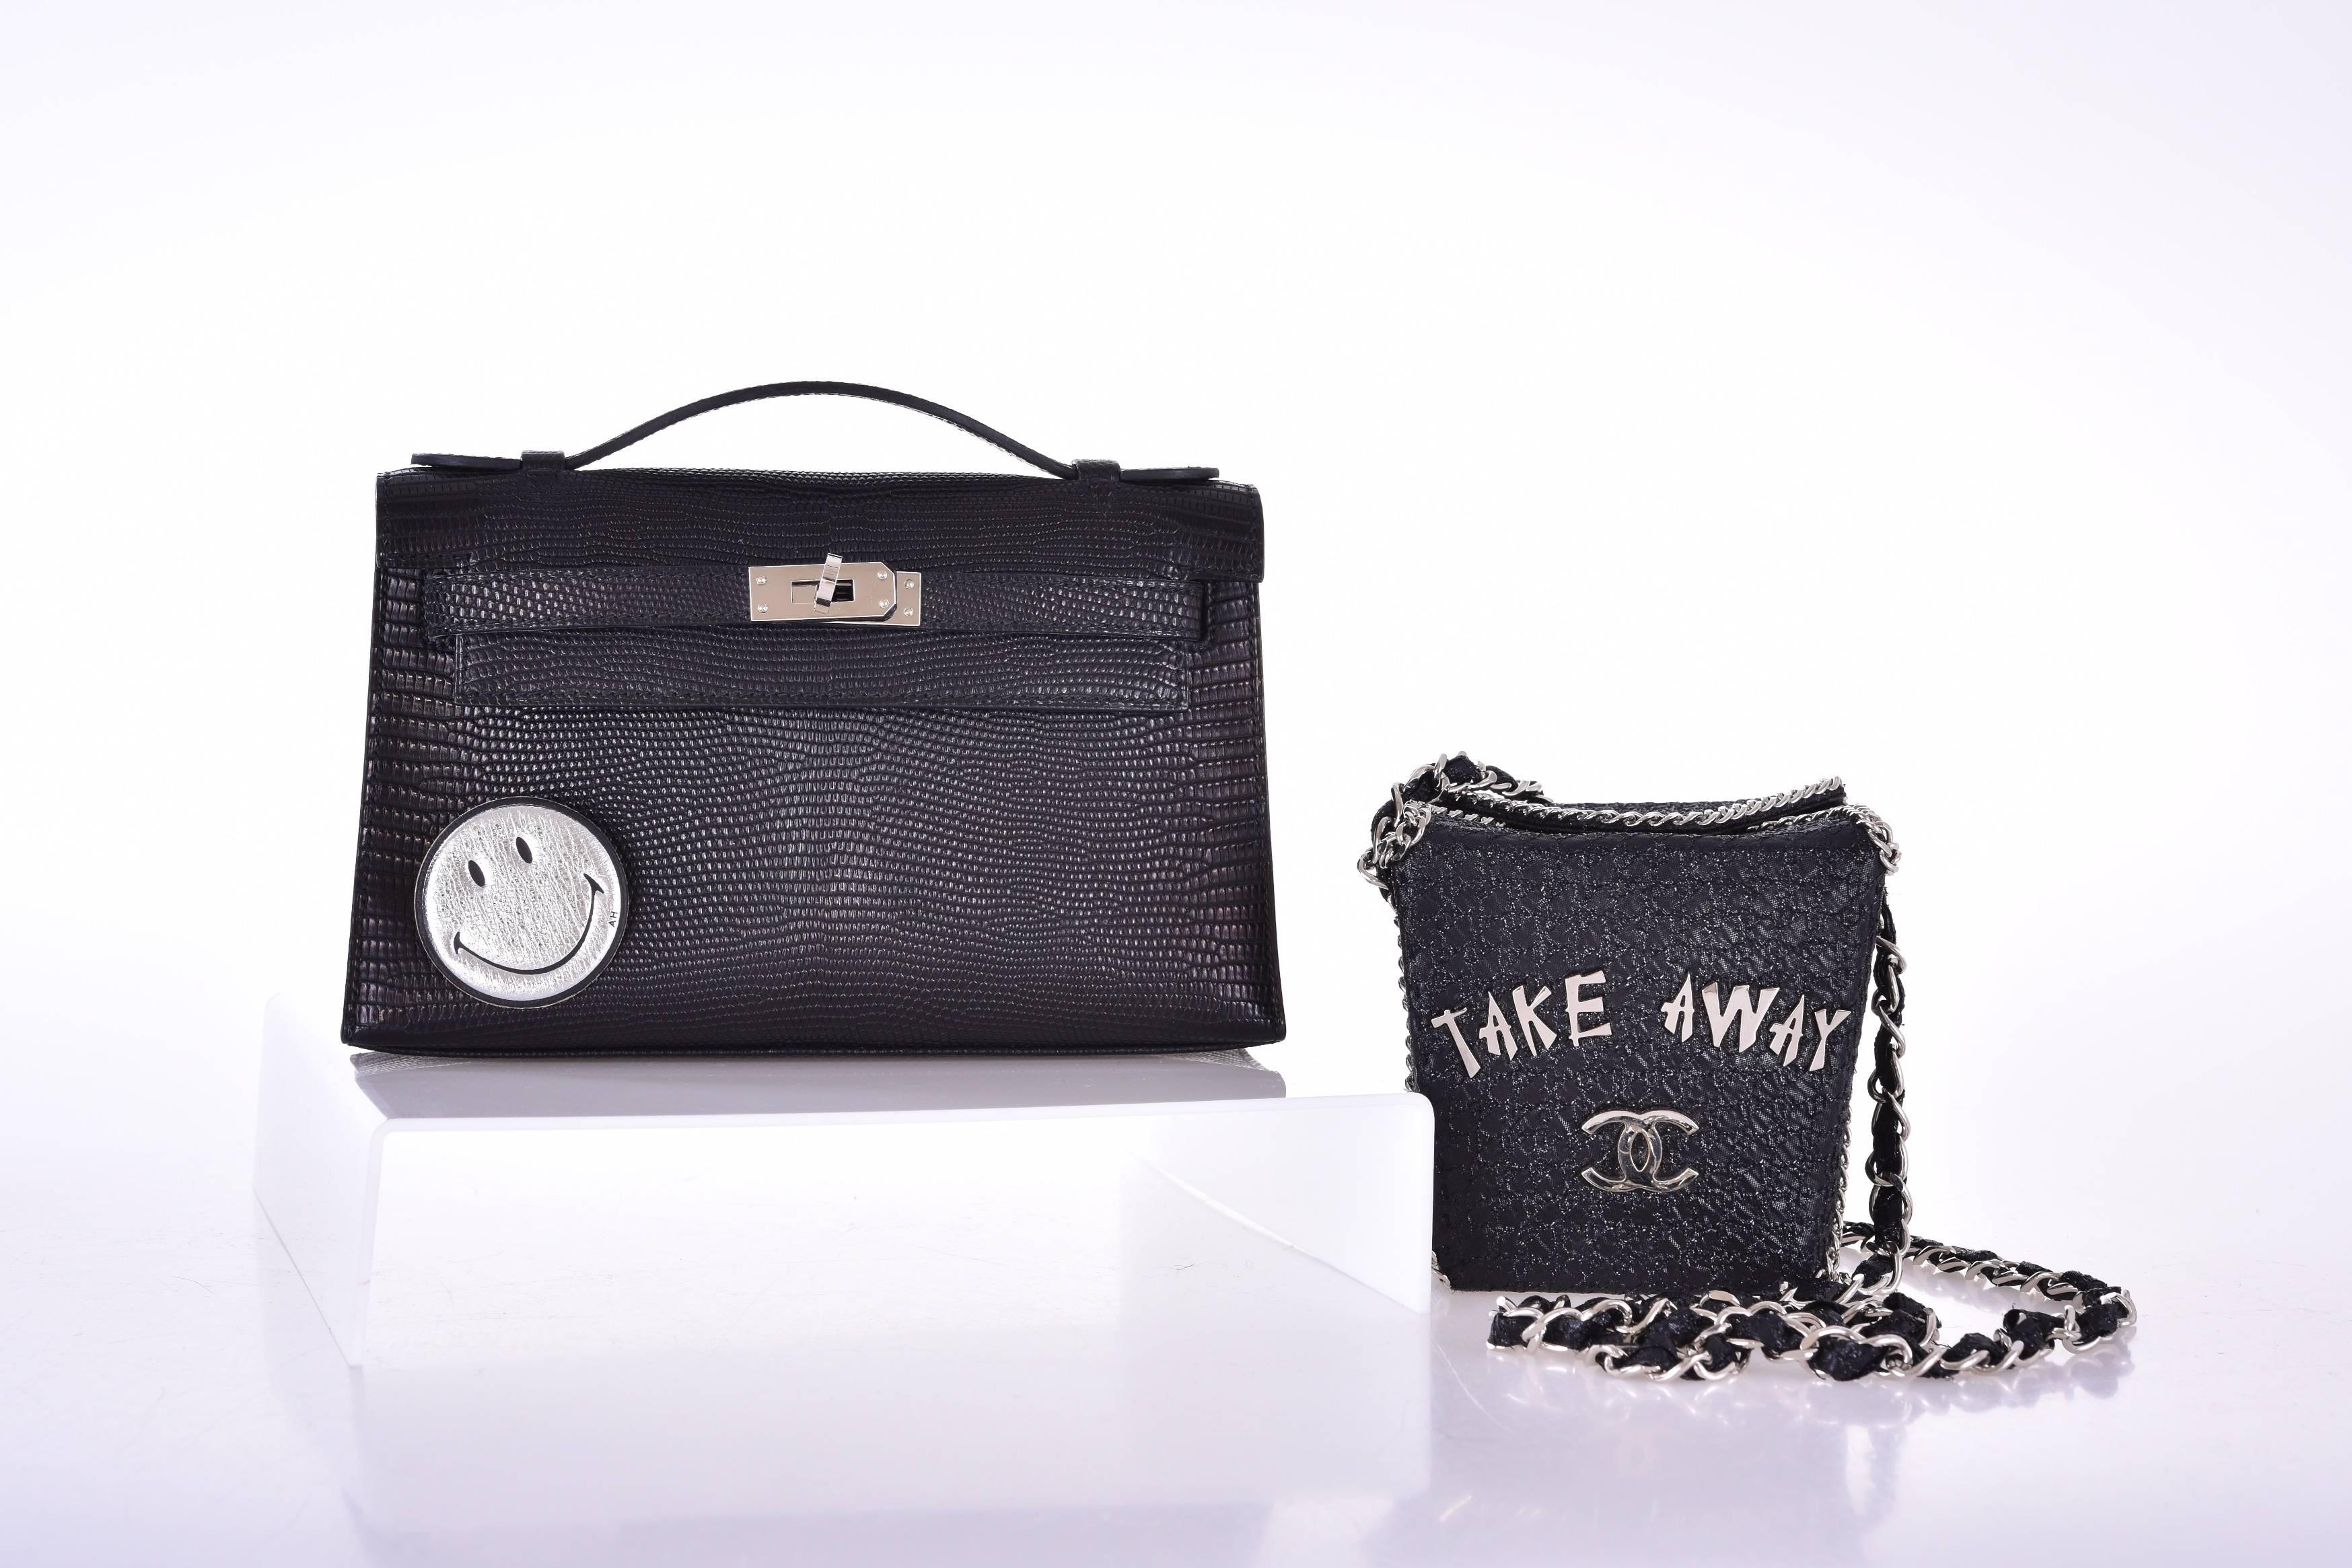 Collectors Chanel TakeAway Bag Shanghai World Expo 2010 JaneFinds 2